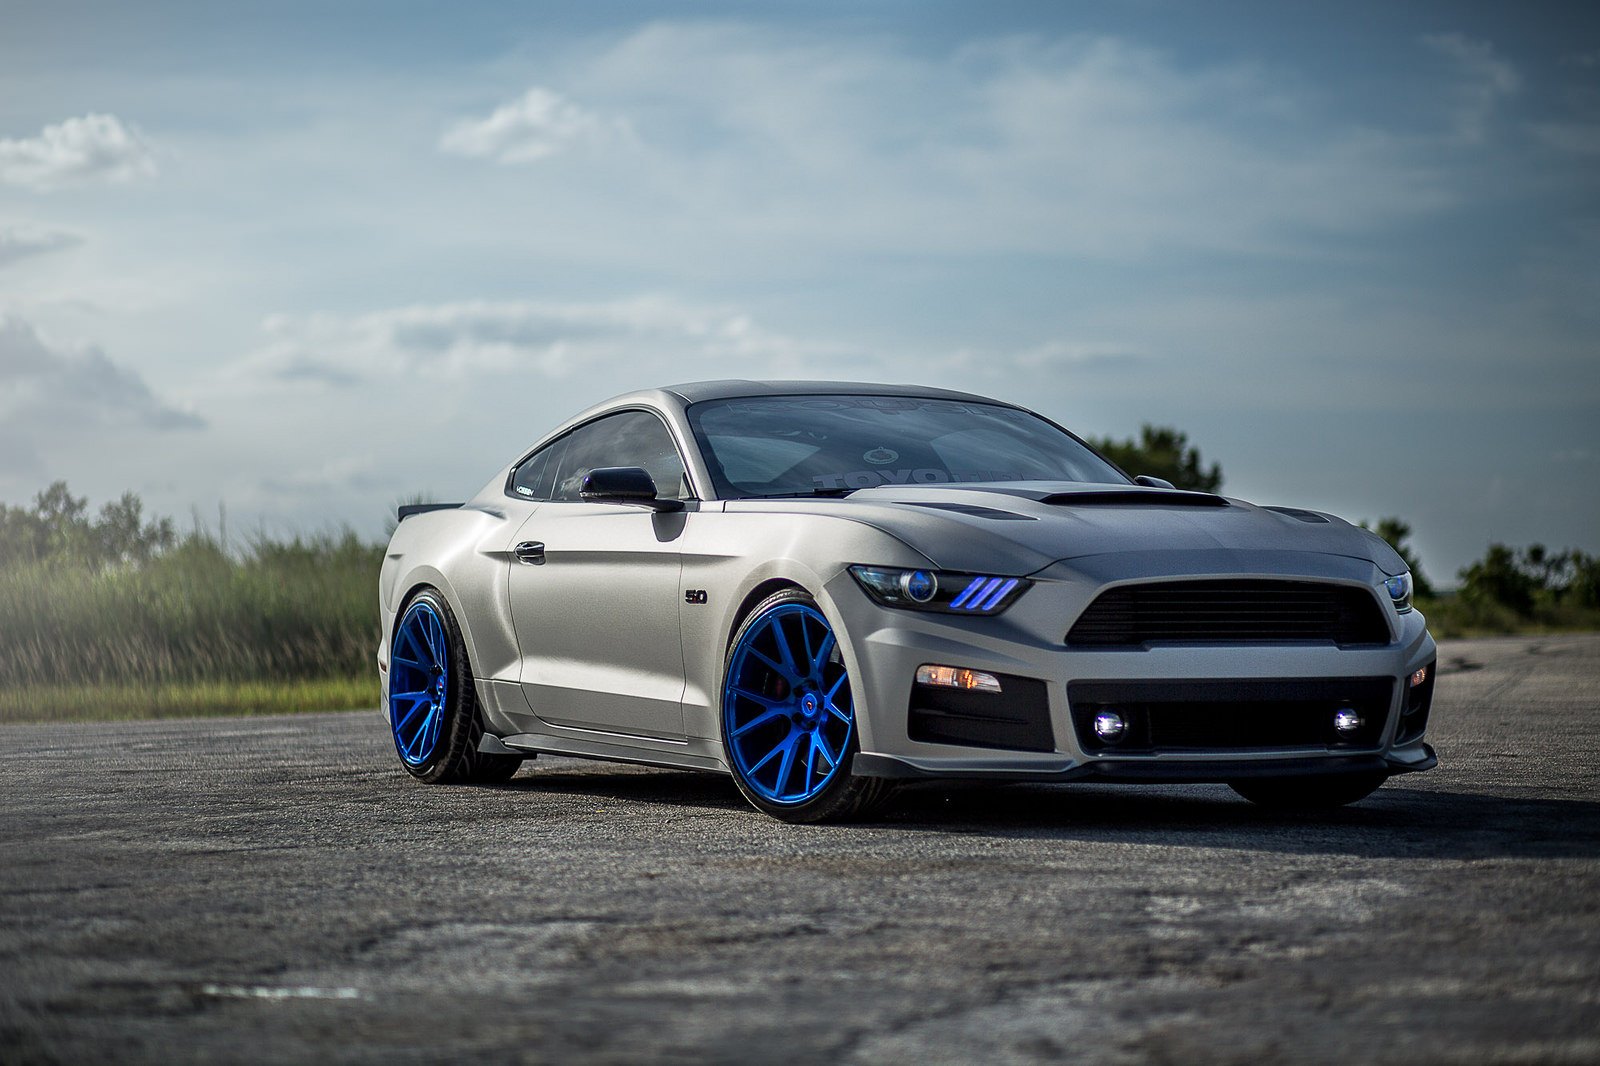 Stanced Ford Mustang 5.0 on Blue custom painted Vossen rims - Photo by Vossen